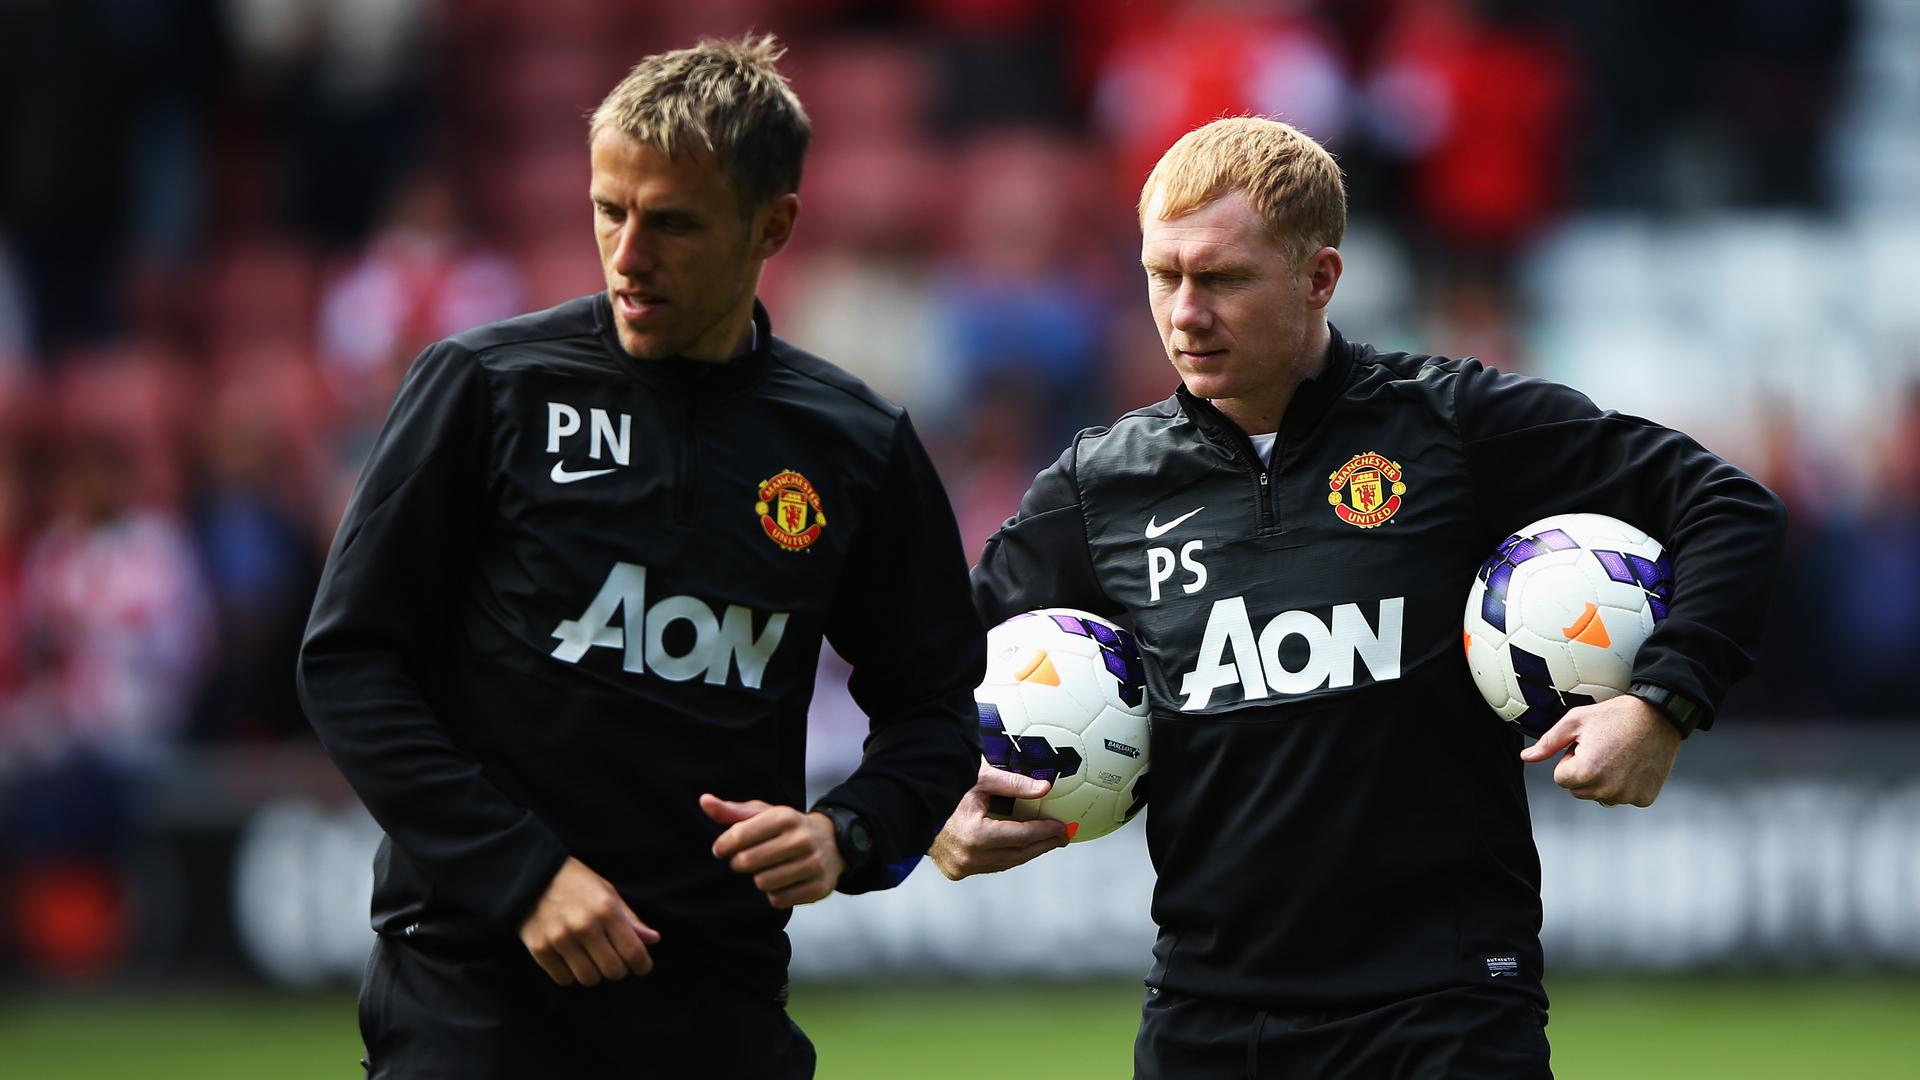 How did Neville annoy Scholes? - Manchester United